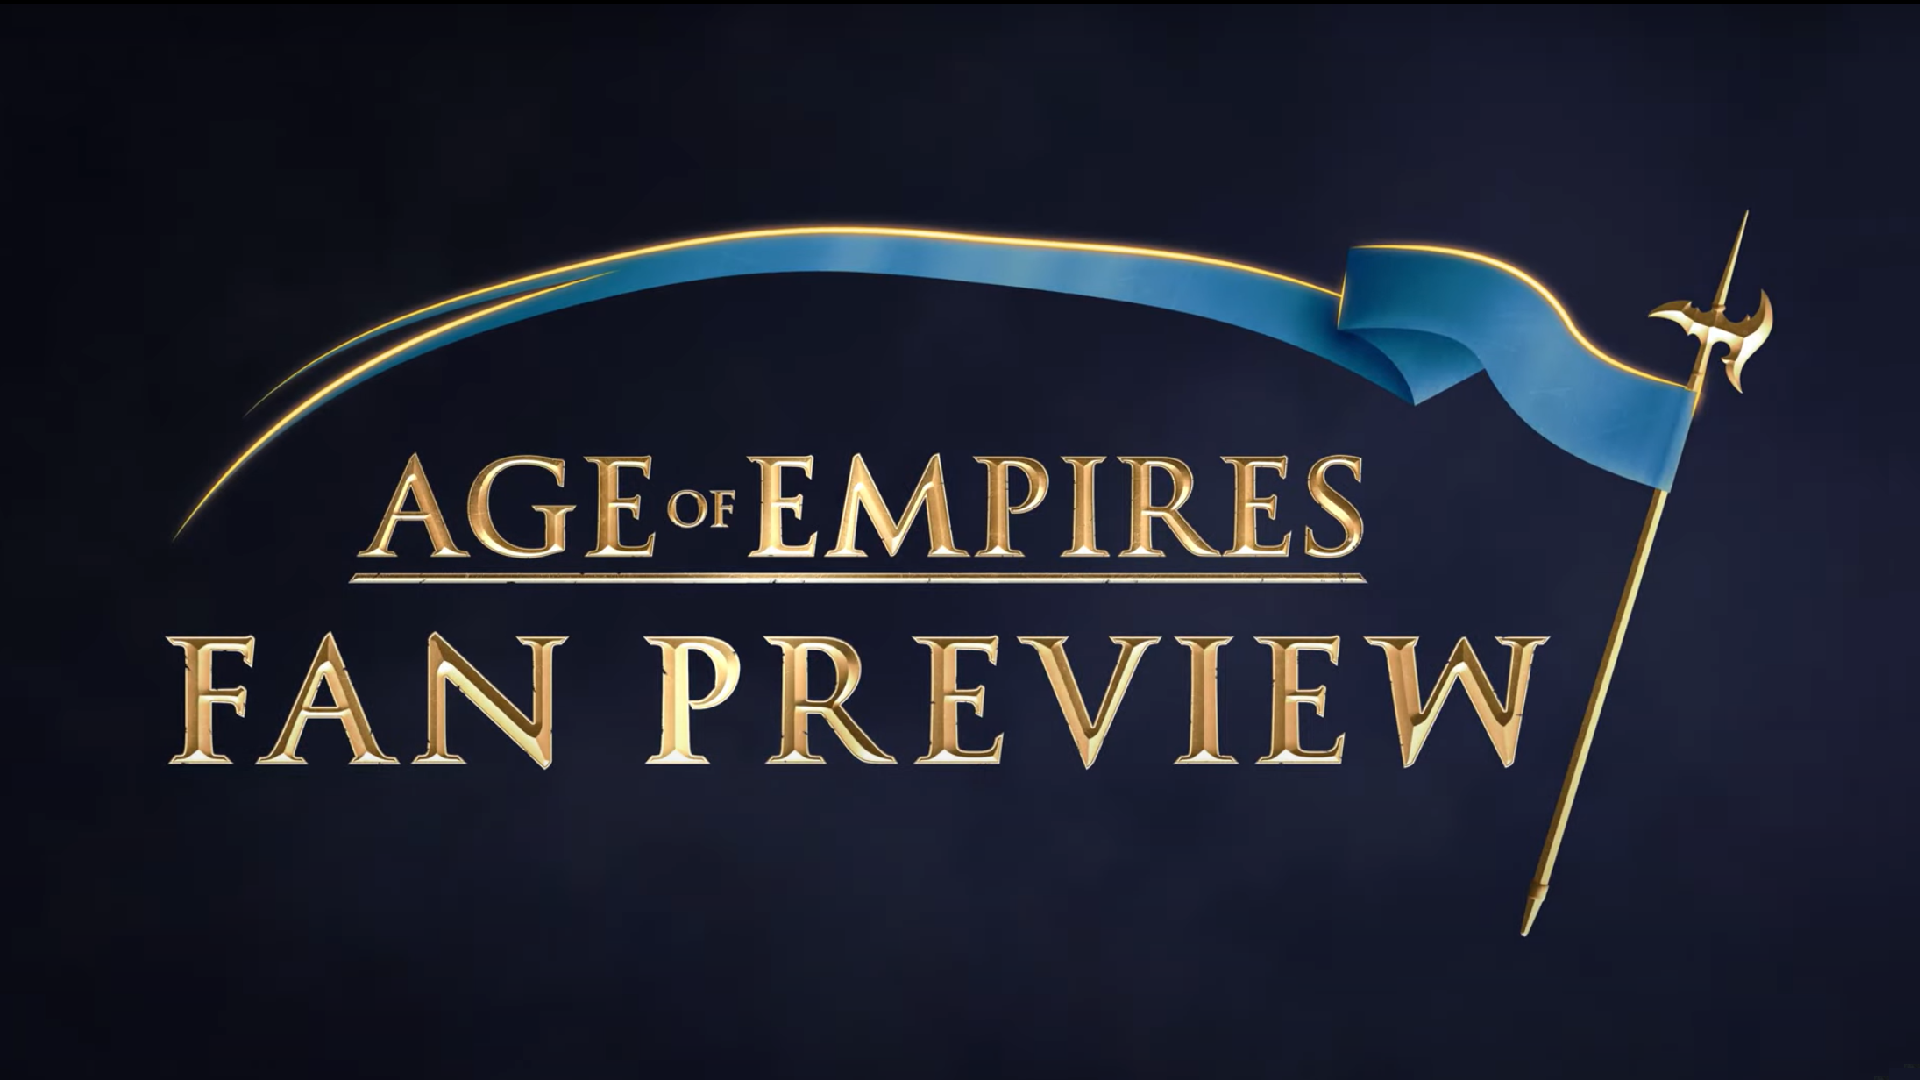 Age of Empires IV: The first game is here